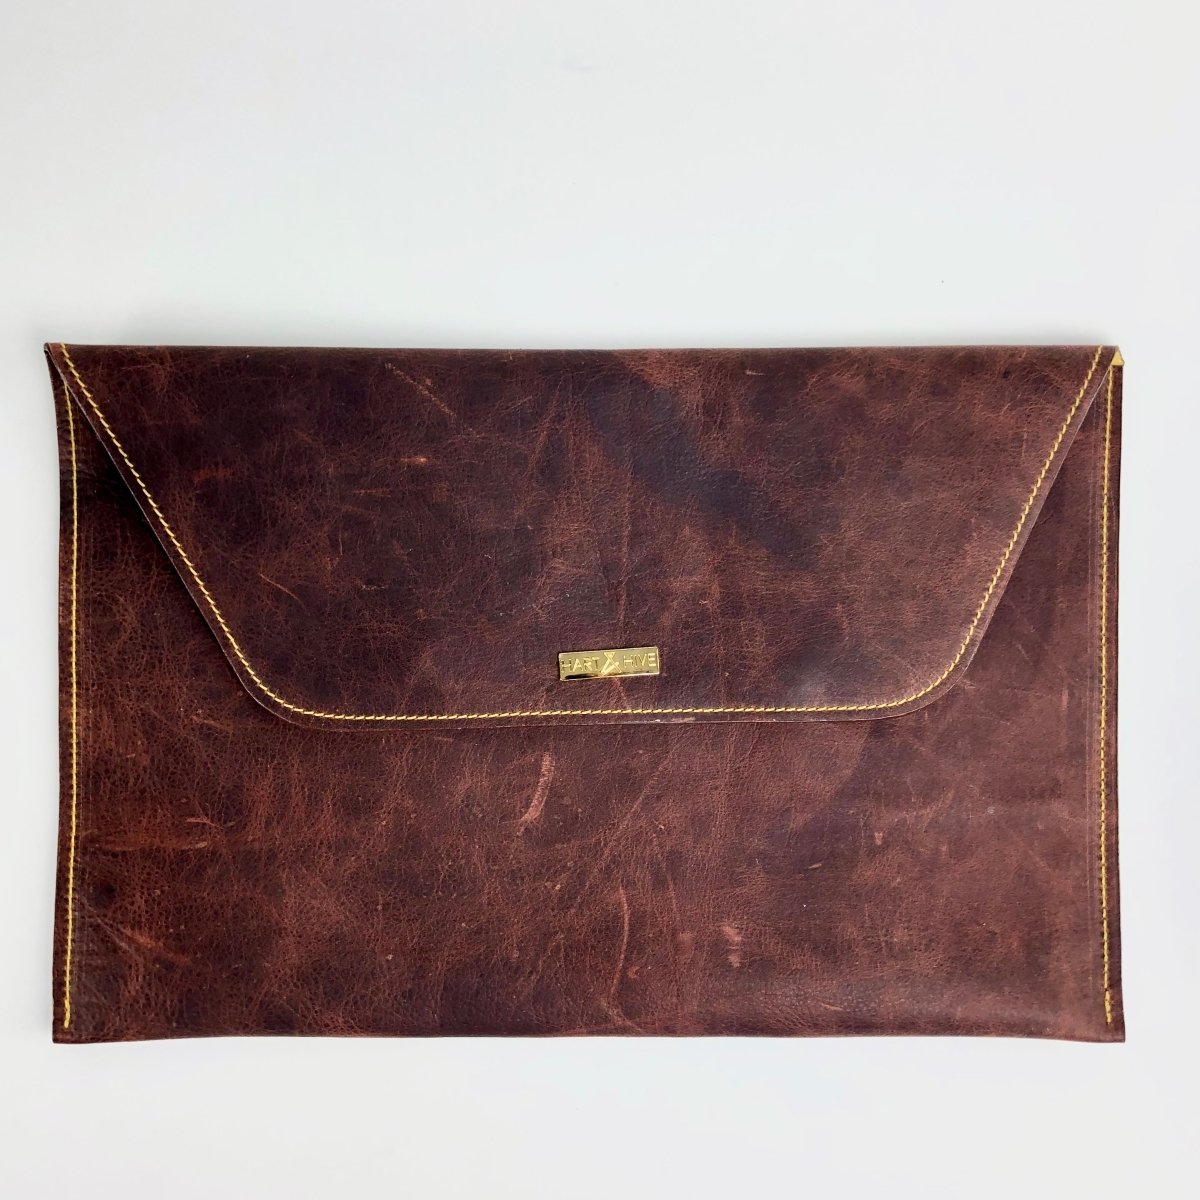 Rustic Brown Leather Envelope Clutch - Hart & Hive